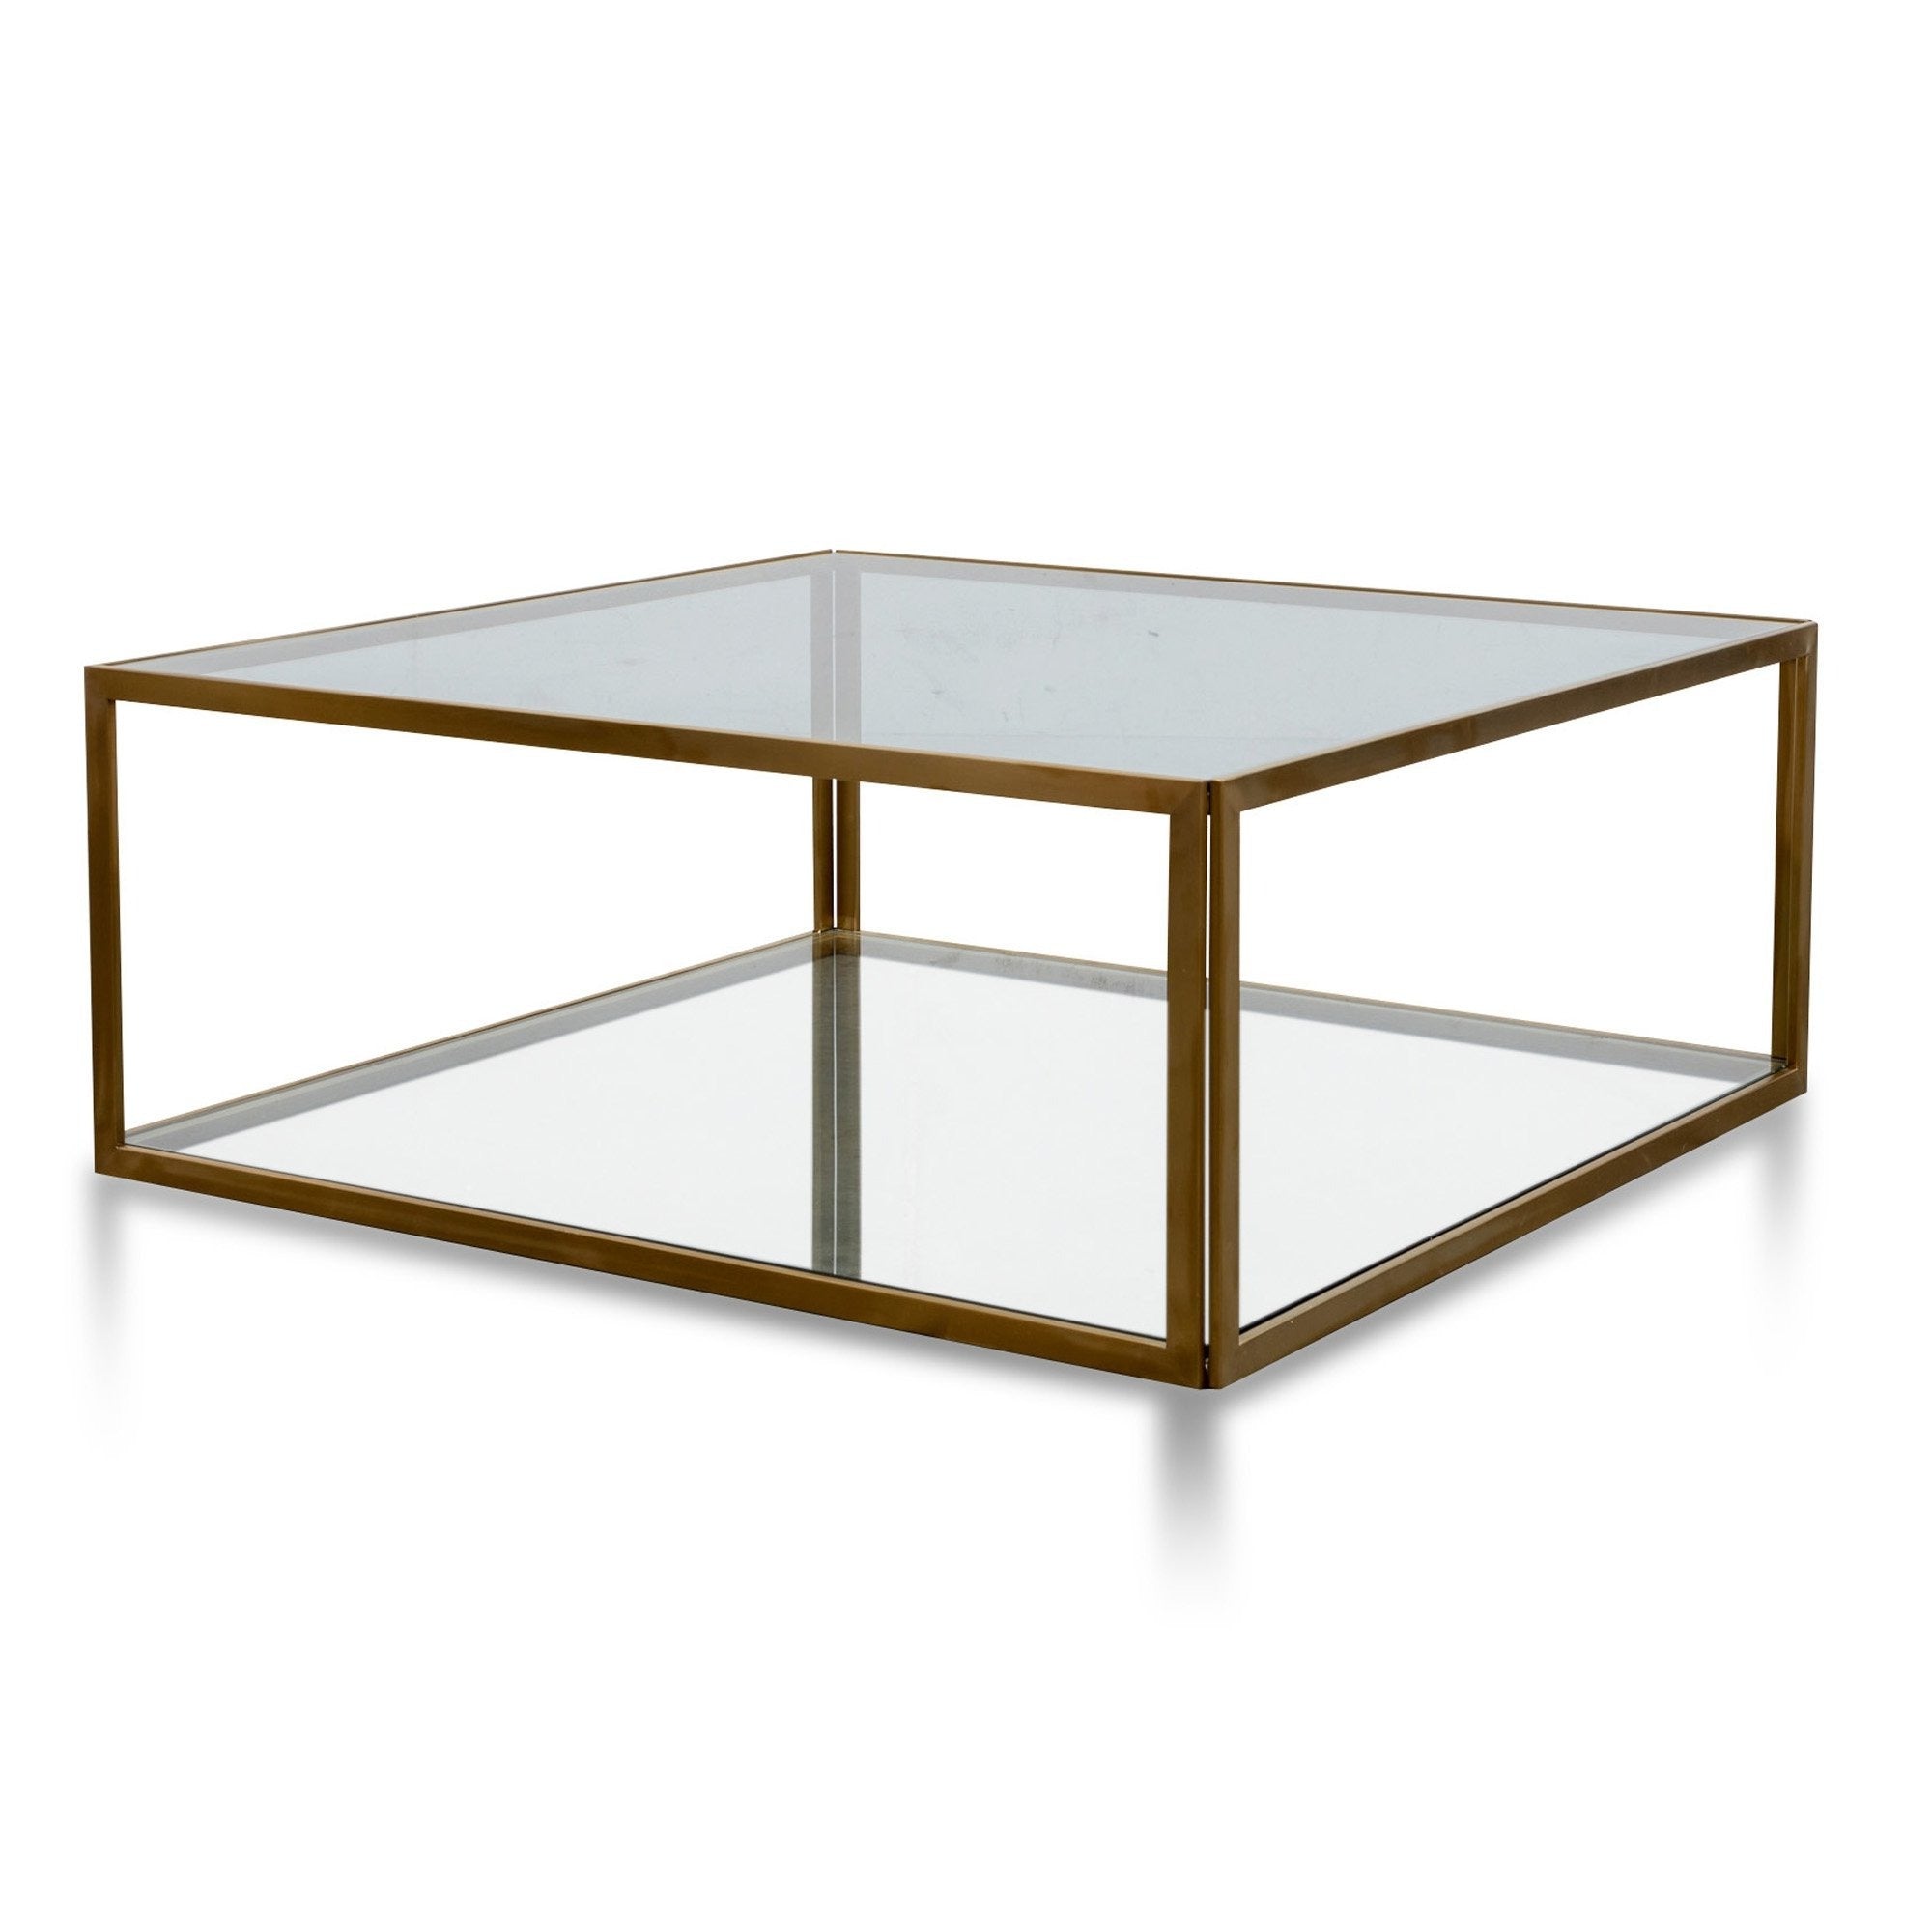 1M Glass Coffee Table - Gold Base